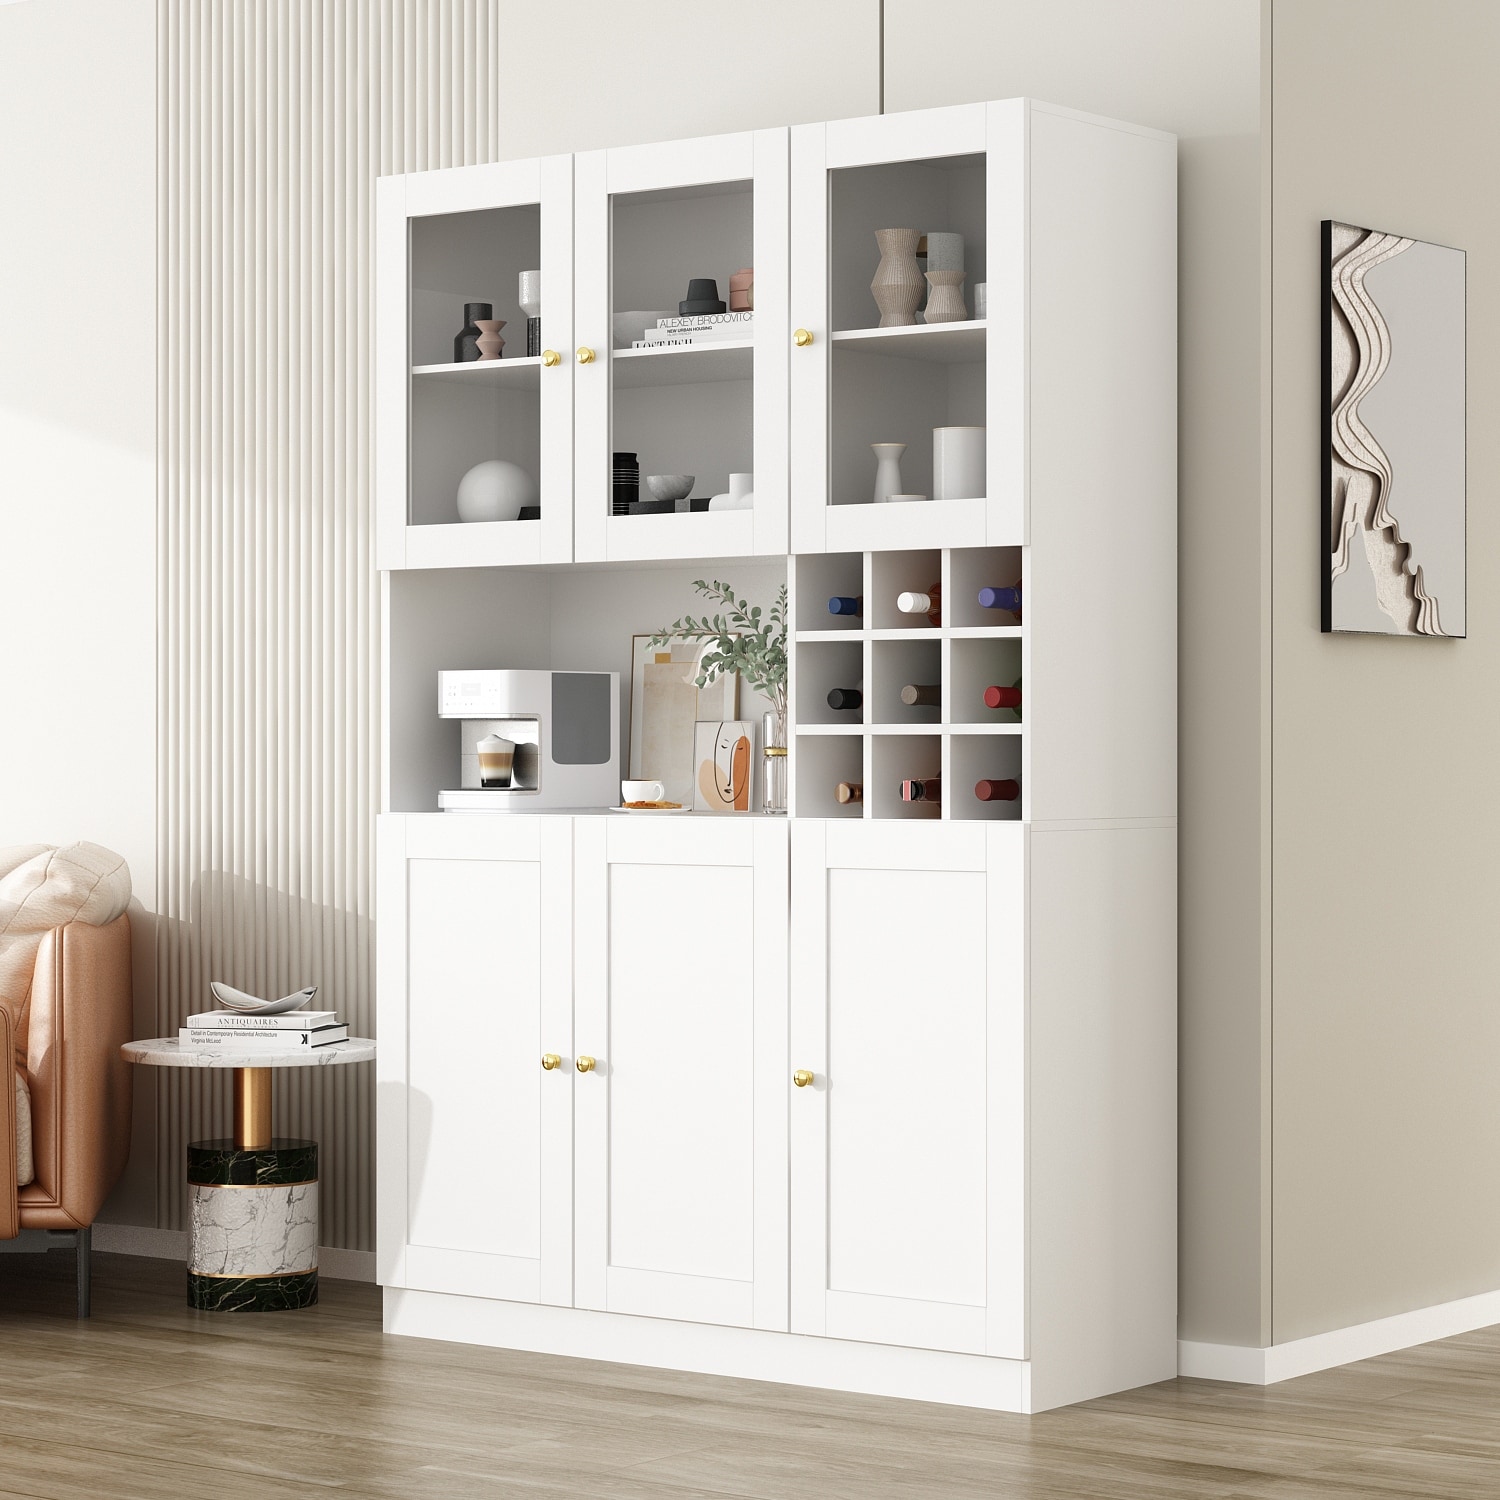 https://ak1.ostkcdn.com/images/products/is/images/direct/0f4c1afc99dfabcf00fa9f8b47310d31a047ad89/Buffet-Kitchen-Pantry-Storage-Cabinet-Storage-Hutch-Acrylic-Glass.jpg